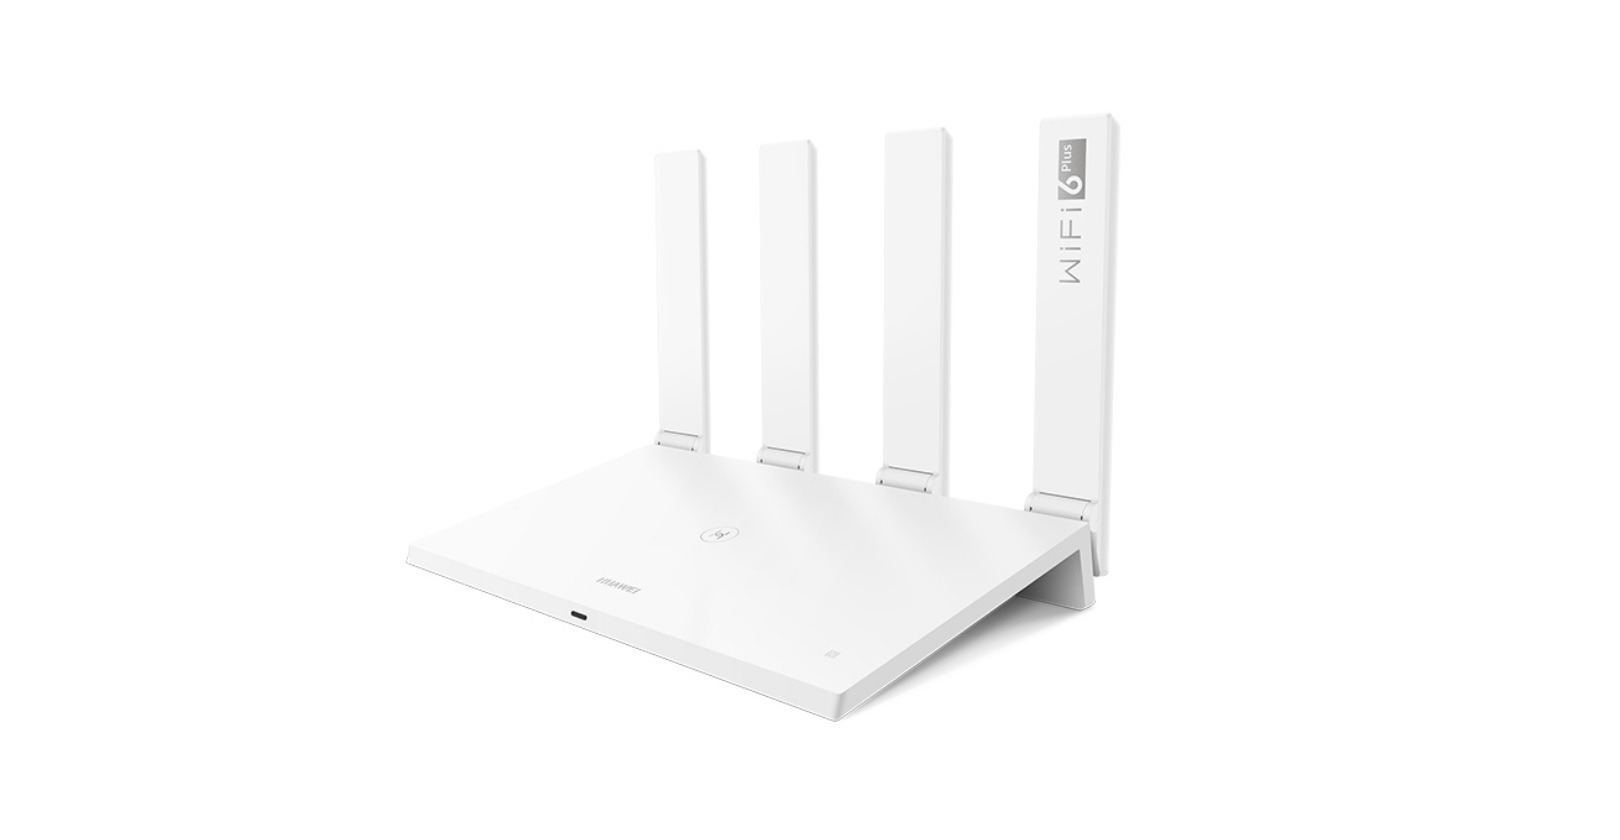 Buying Guidelines of Huawei Routers